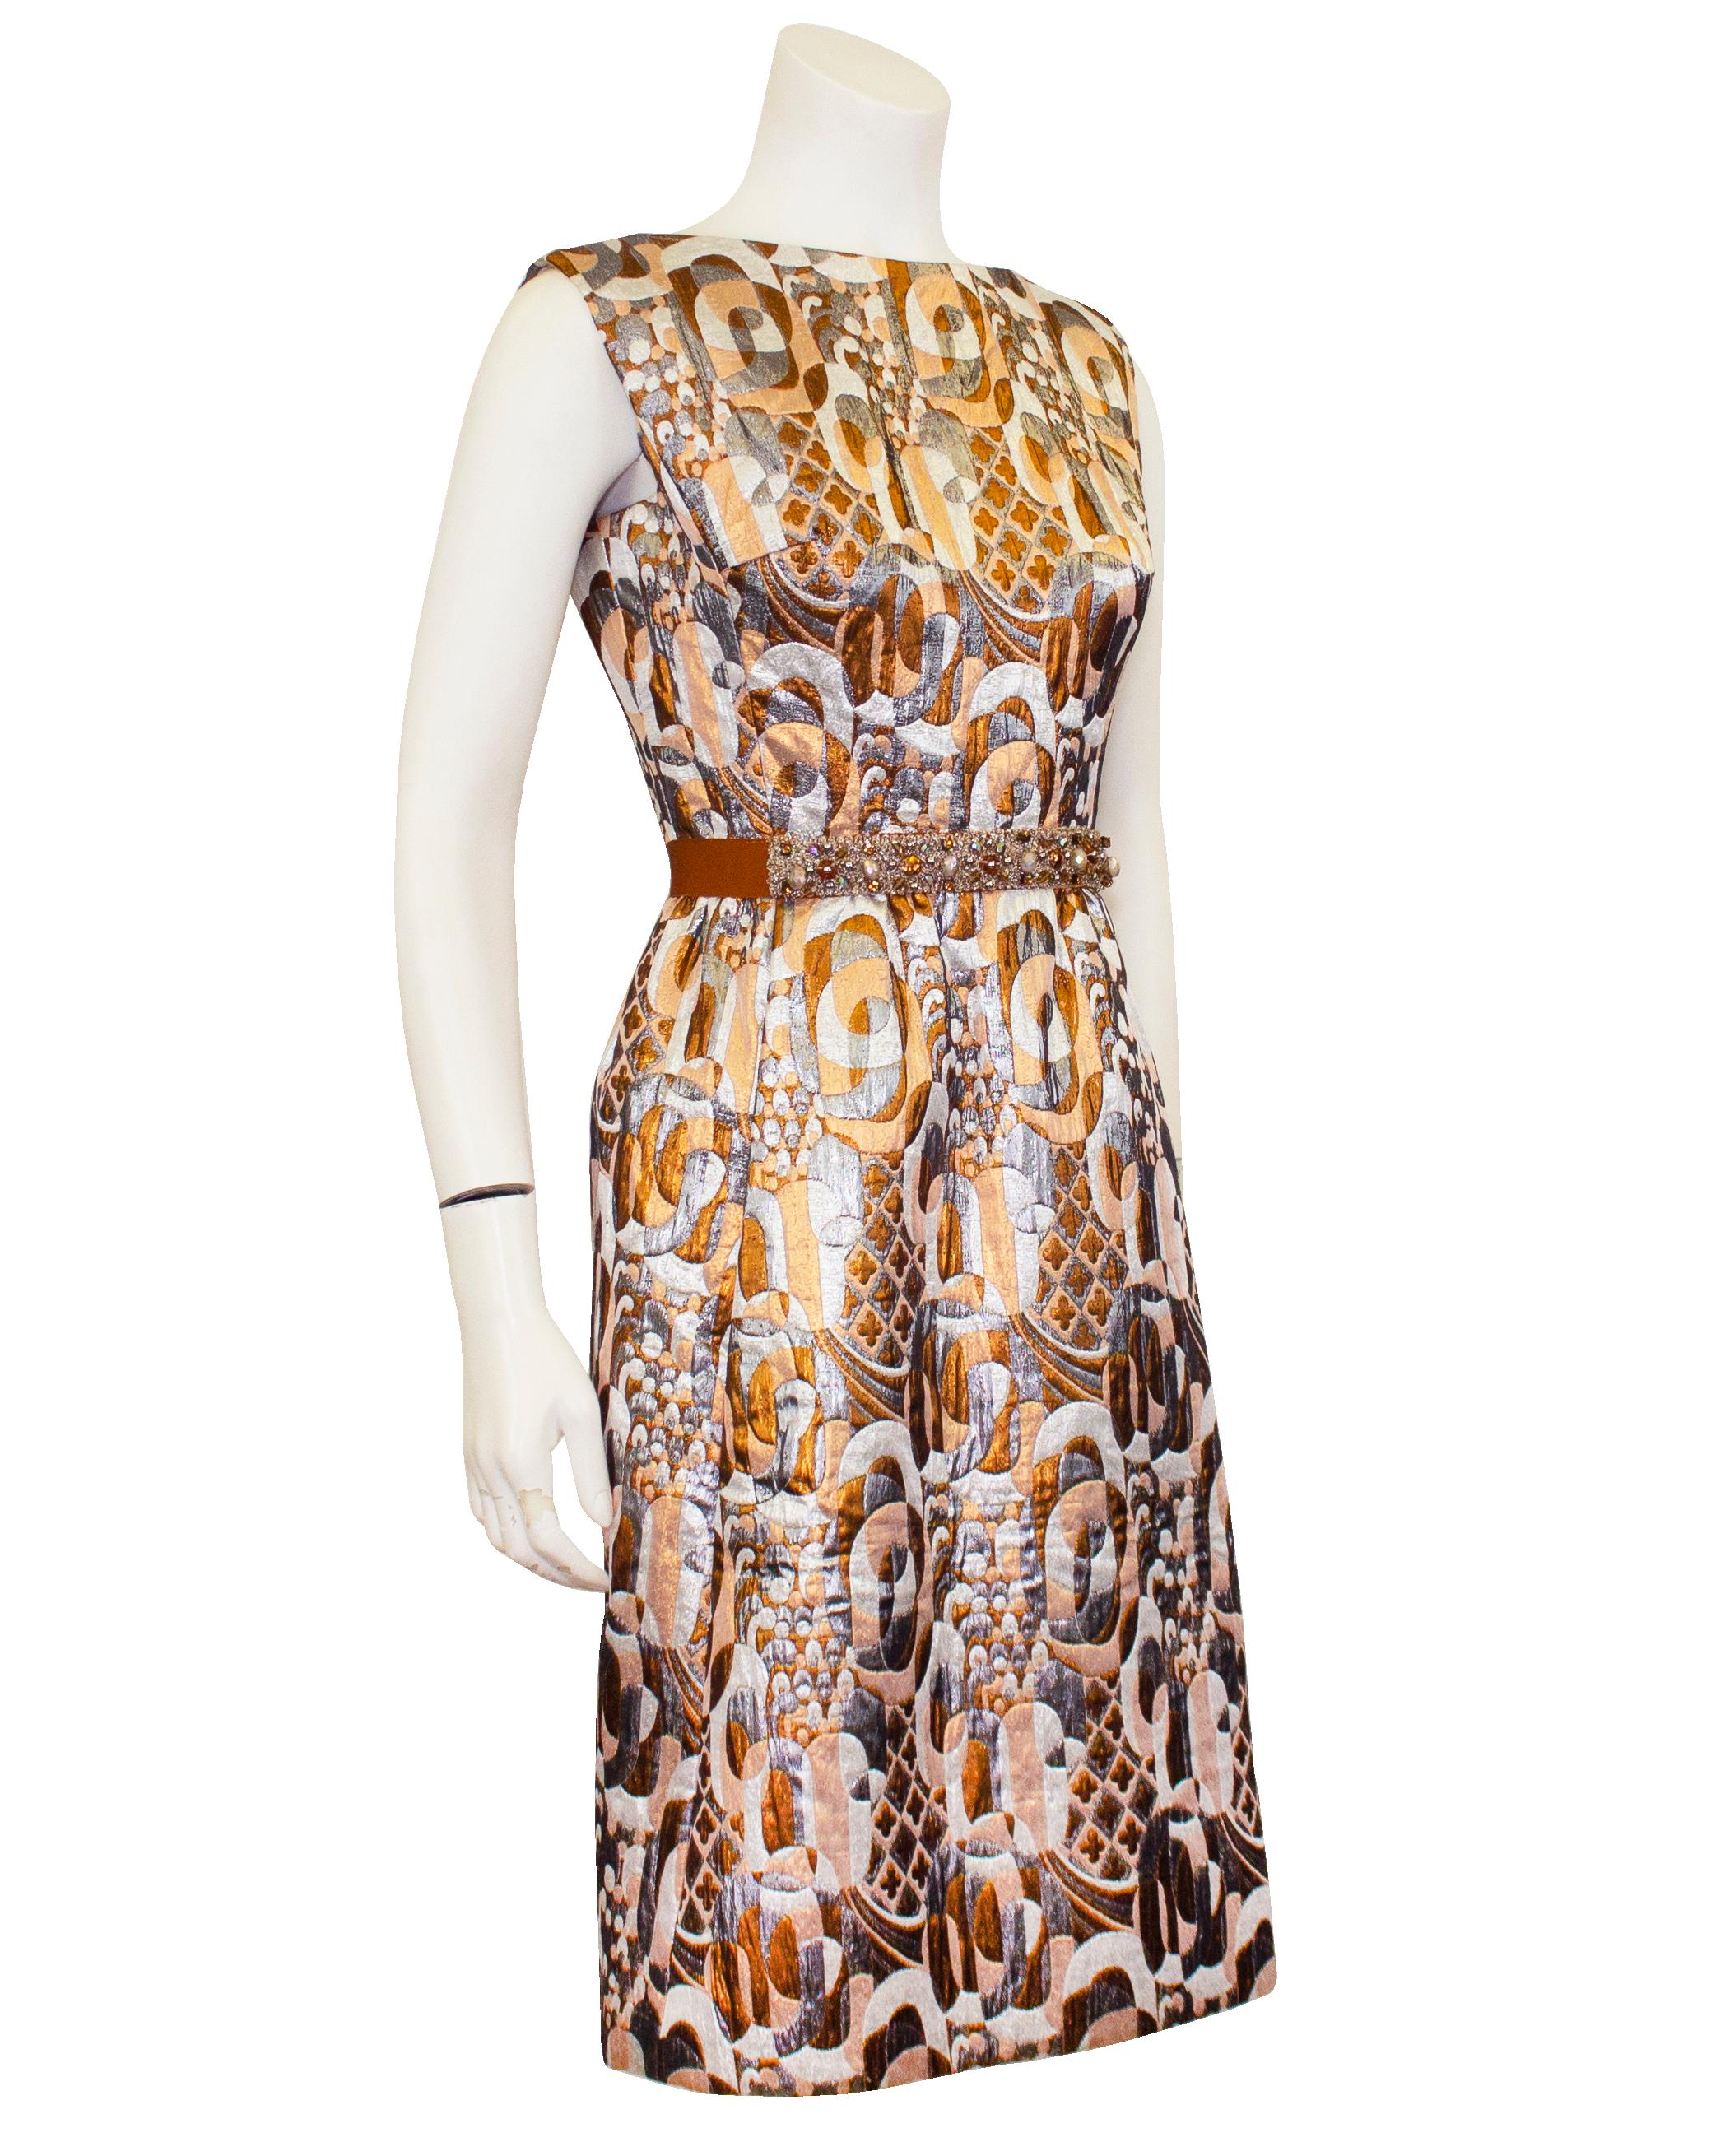 Glitzy and very pretty 1960s Romantica by Victor Costa cocktail dress. Made from a stunning mod, geometric brocade in silver, bronze and metallic white and peach. Sleeveless with a boatneck line. Fitted through the body and the waist is accented